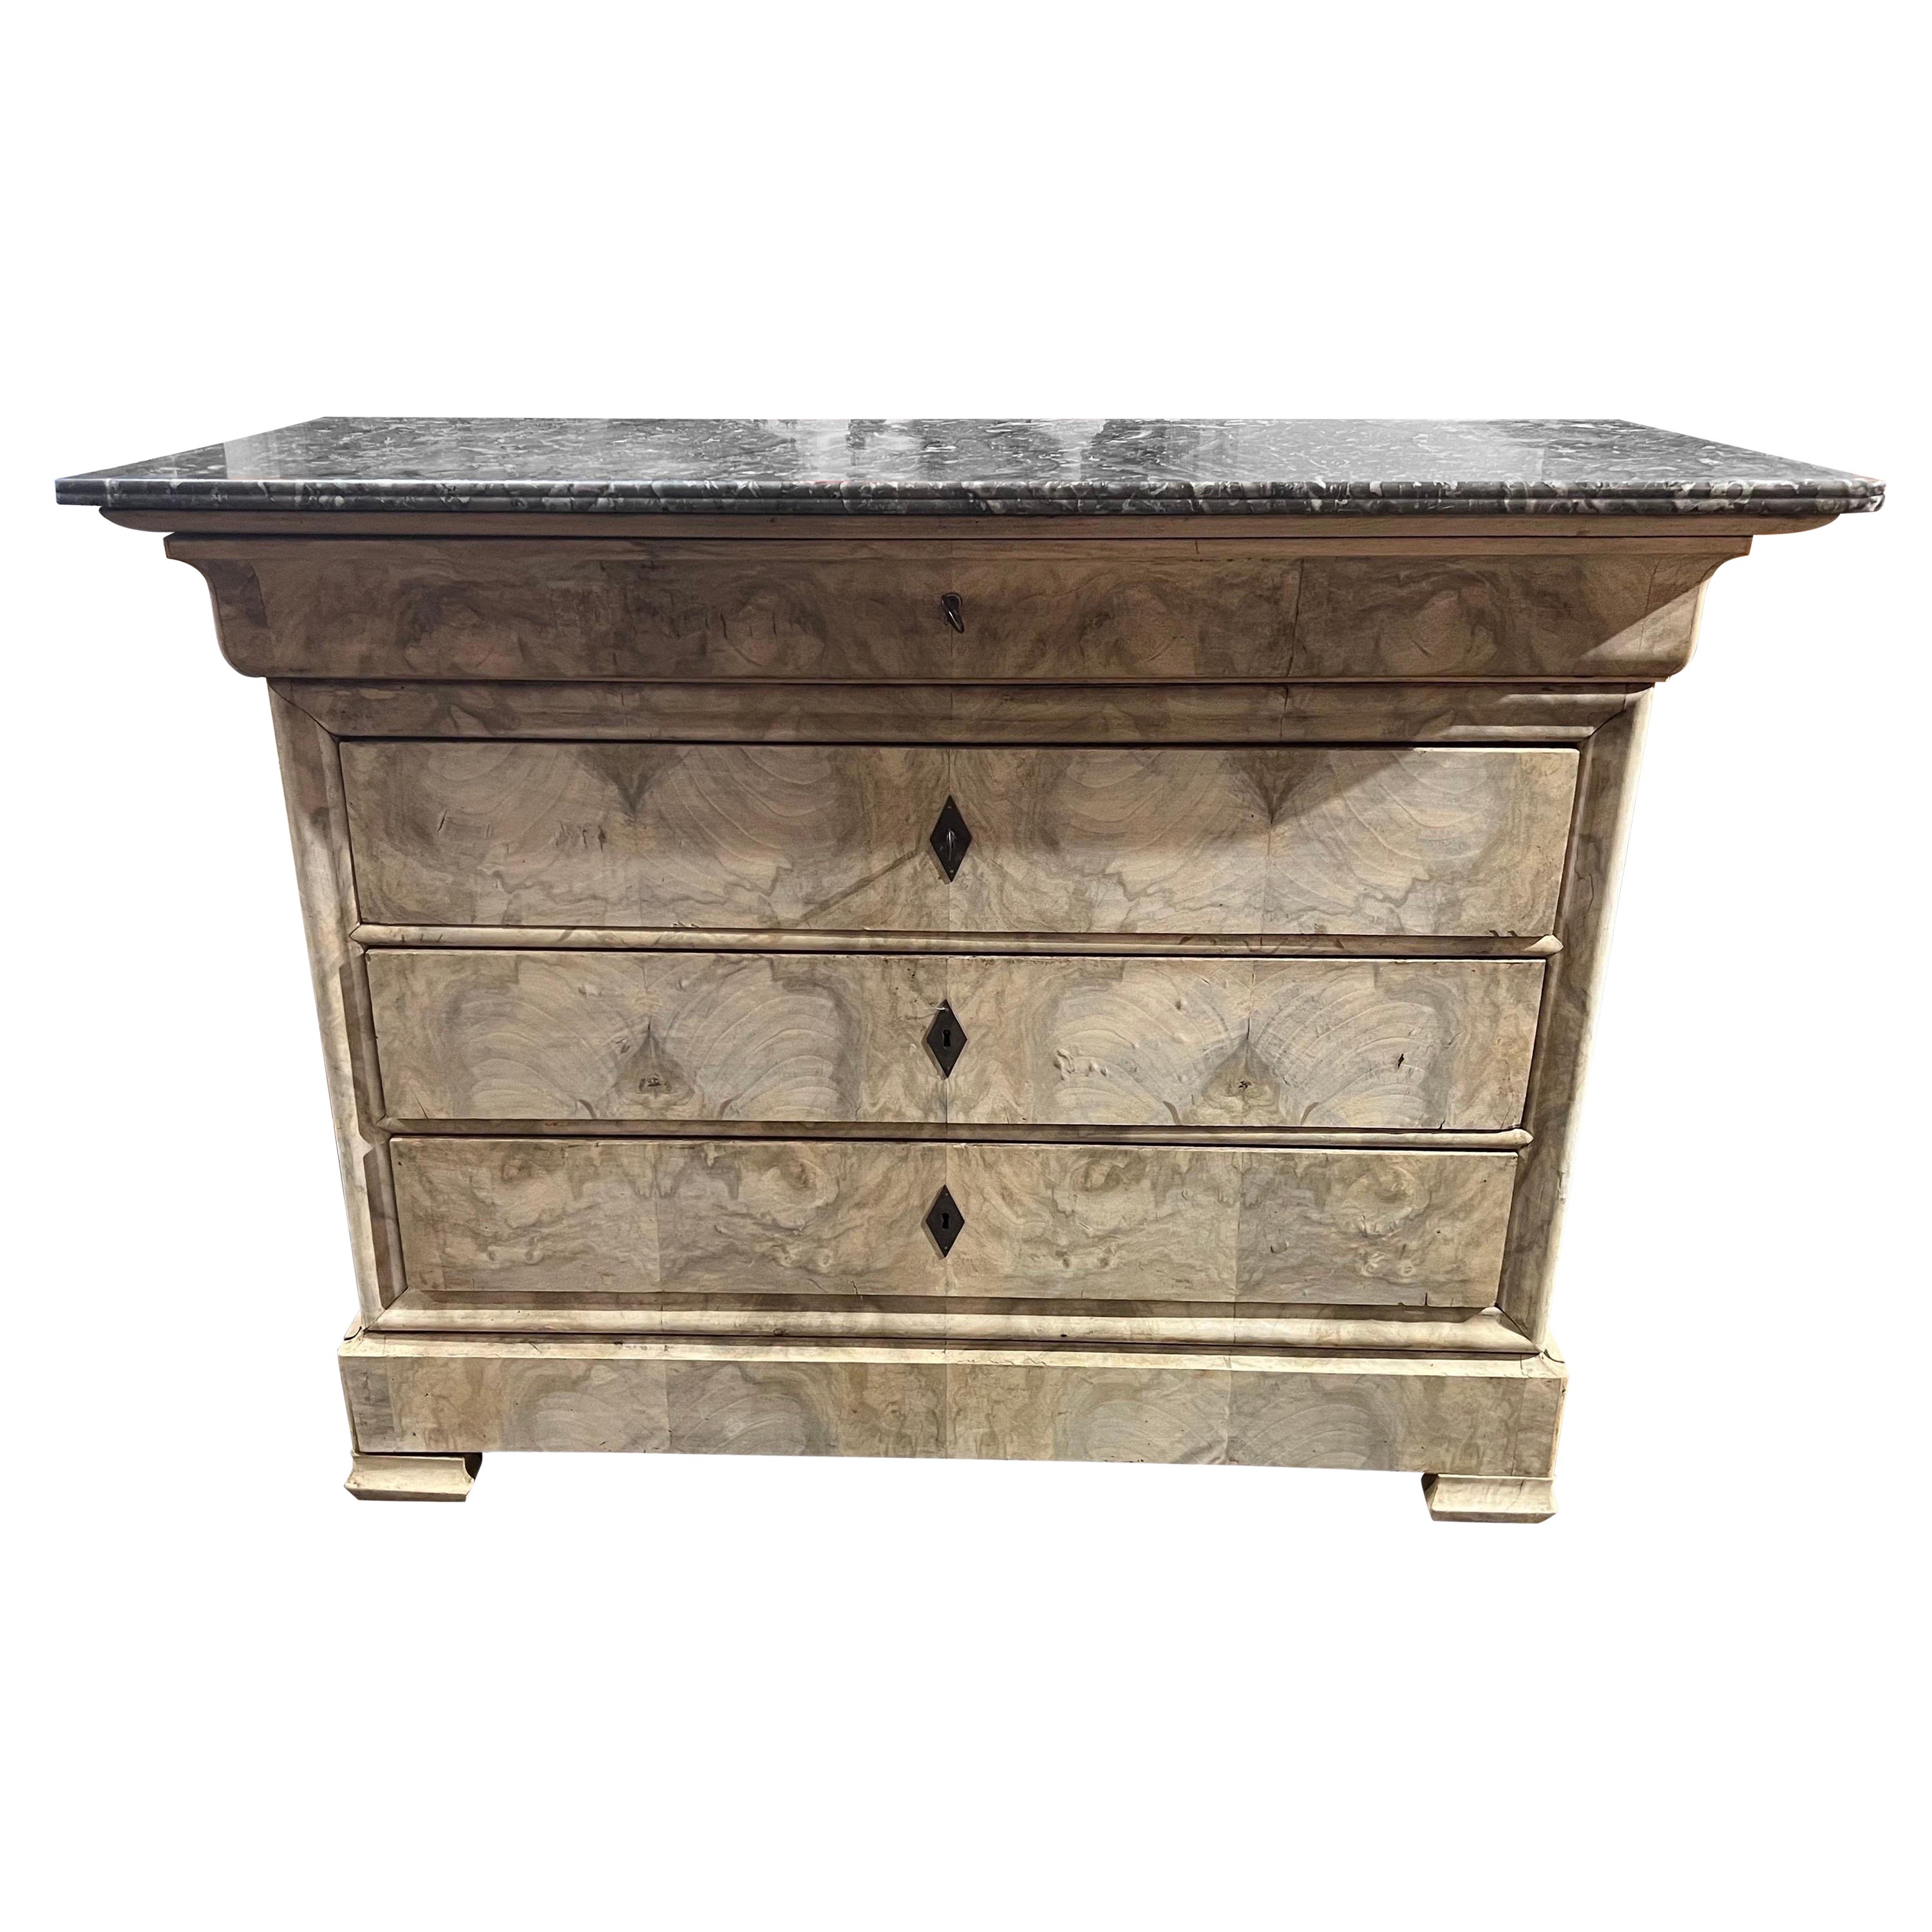 19th Century Bleached French Fossilized Marble Top Chest with Hidden Drawer For Sale